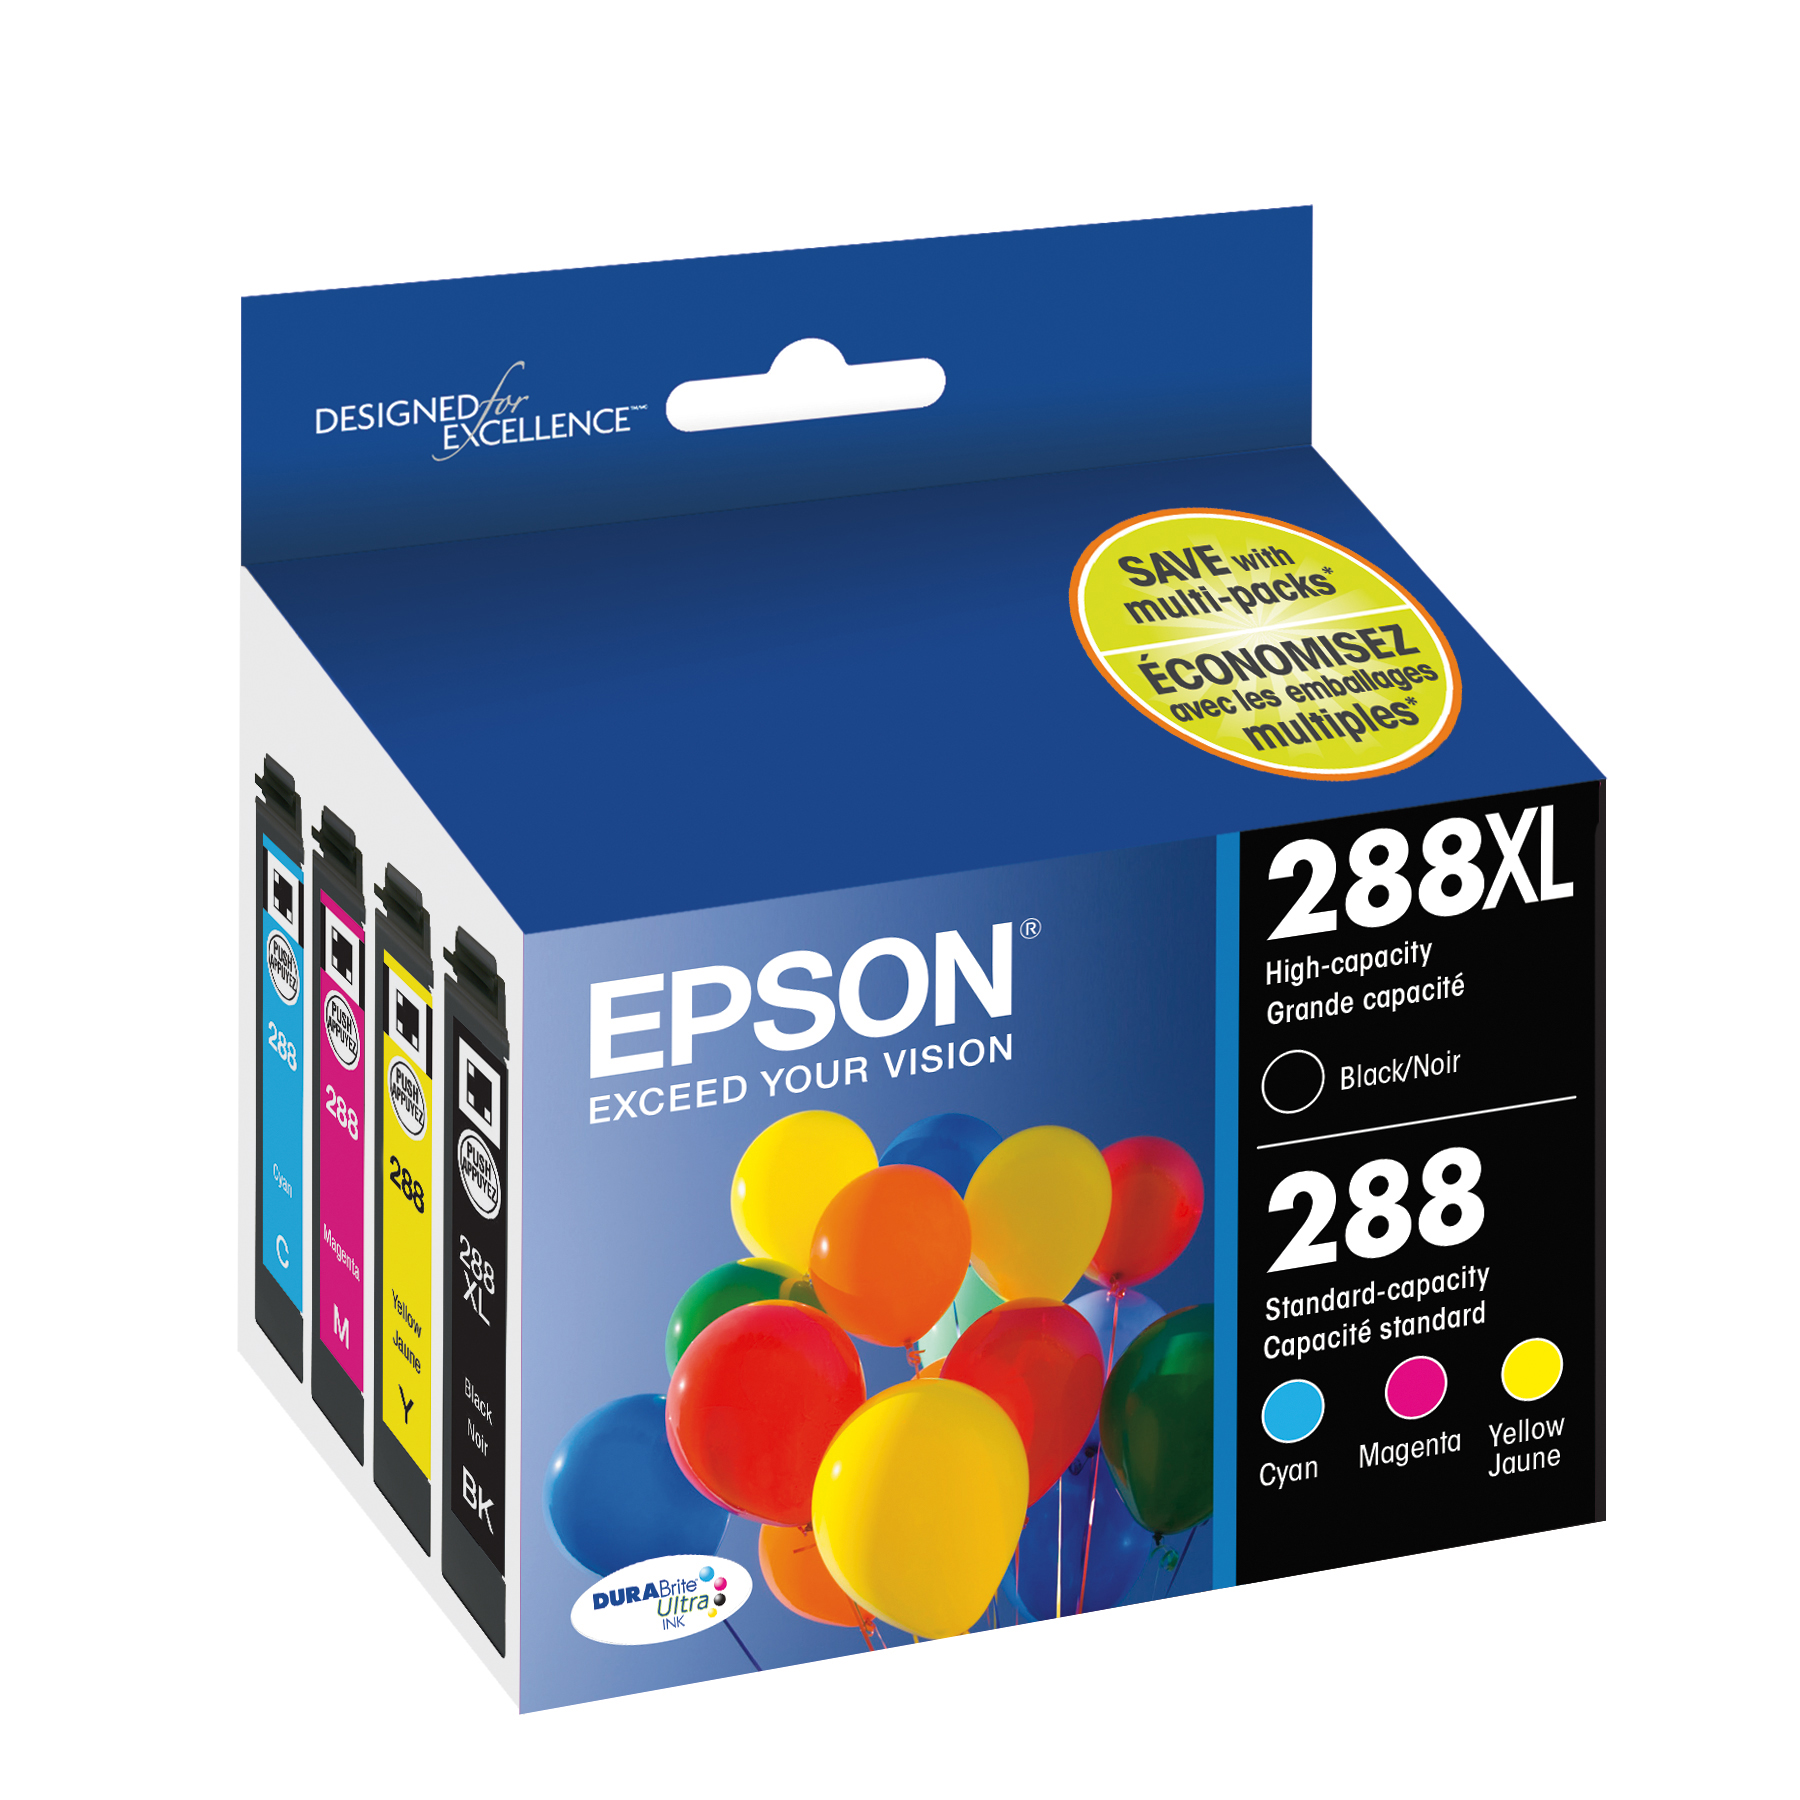 EPSON 288 DURABrite Ultra Ink High Capacity Black & Standard Color Cartridge Combo Pack (T288XL-BCS) Works with Expression XP-330, XP-430, XP-434, XP-340, XP-440, XP-446 - image 2 of 5